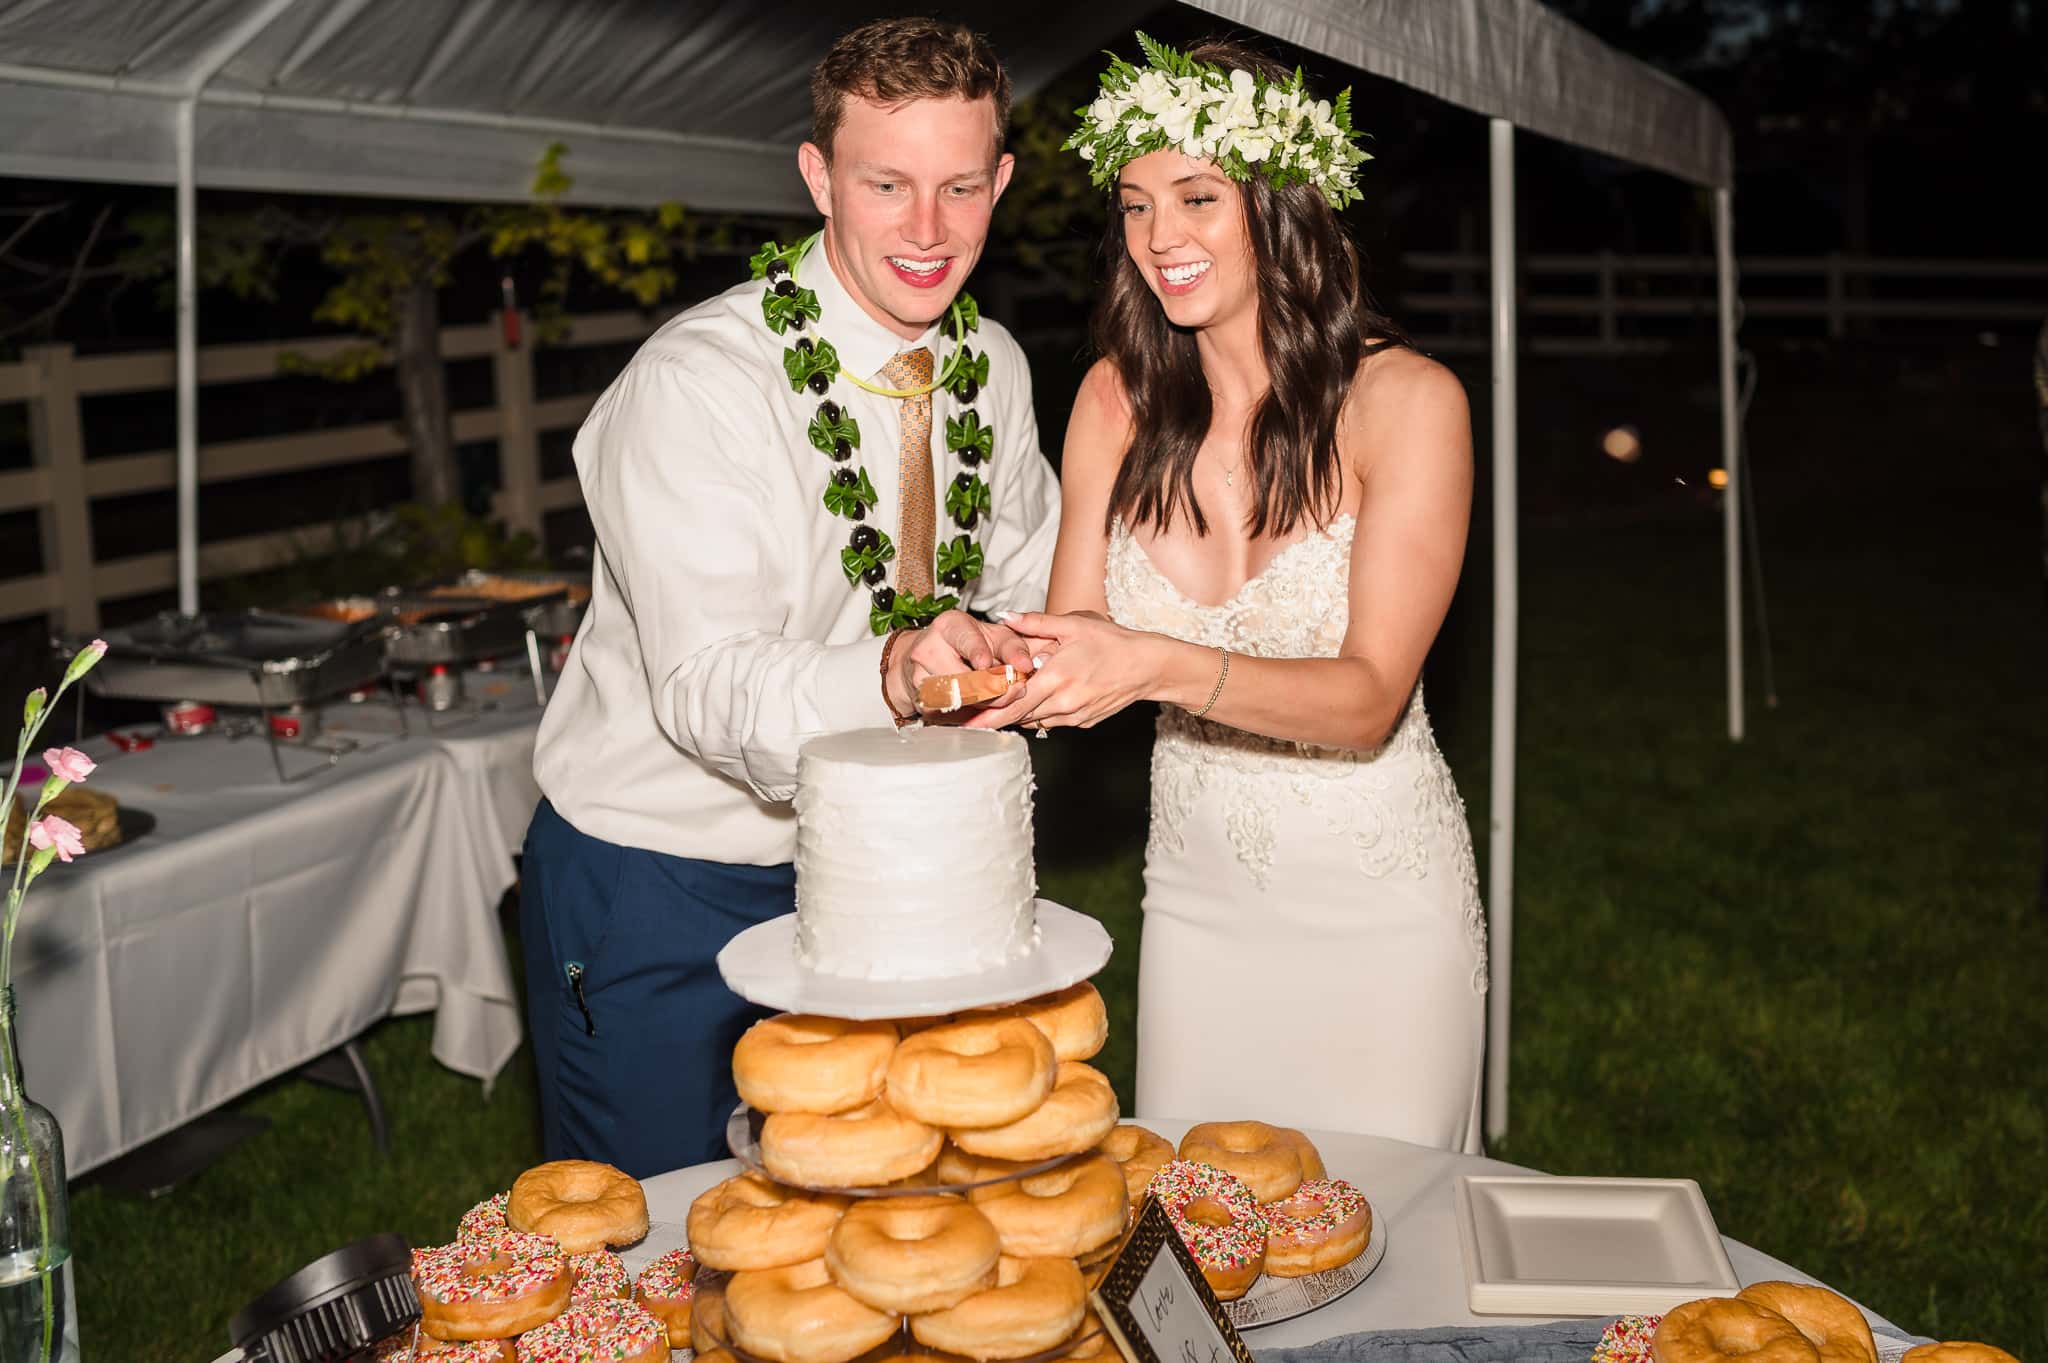 The bride and groom cut the wedding cake located behind the stacks of donuts.